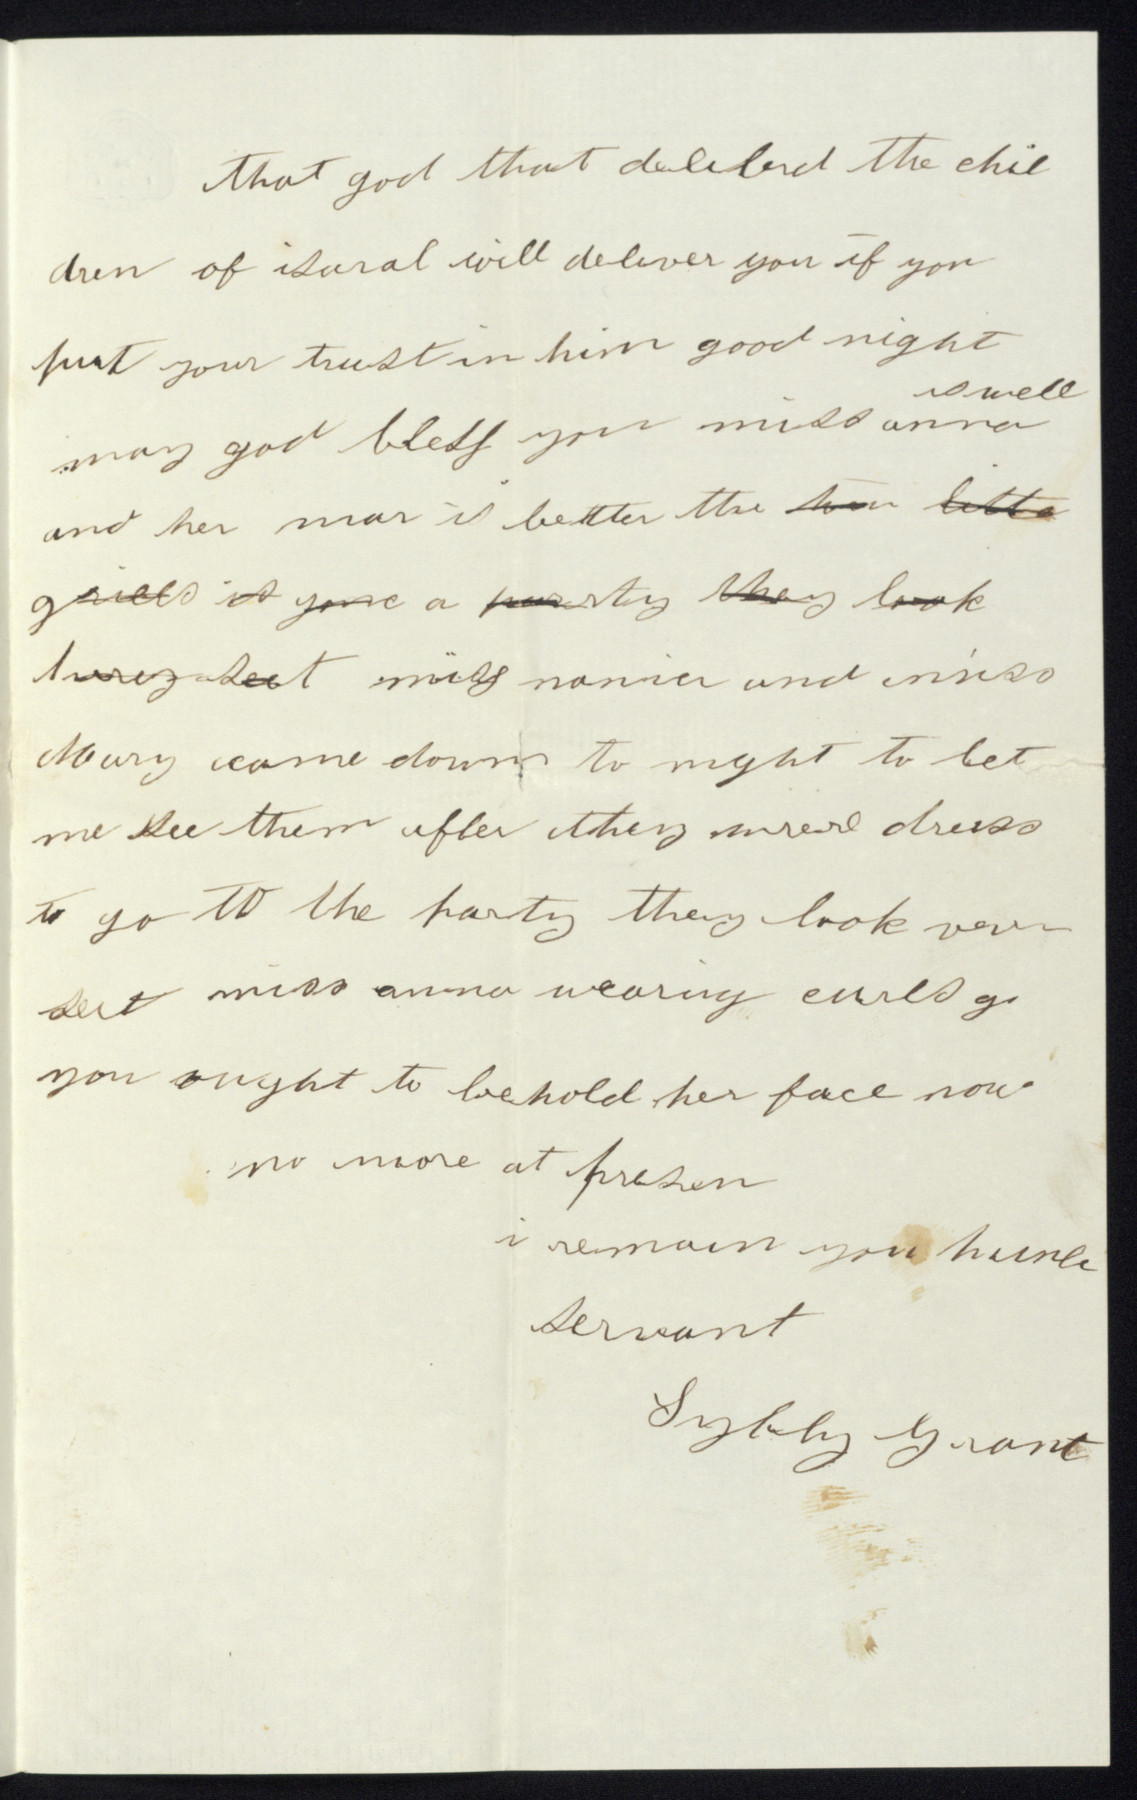 Image for Autograph Letter from Sybby Grant to Her Enslaver, John Hanson Thomas